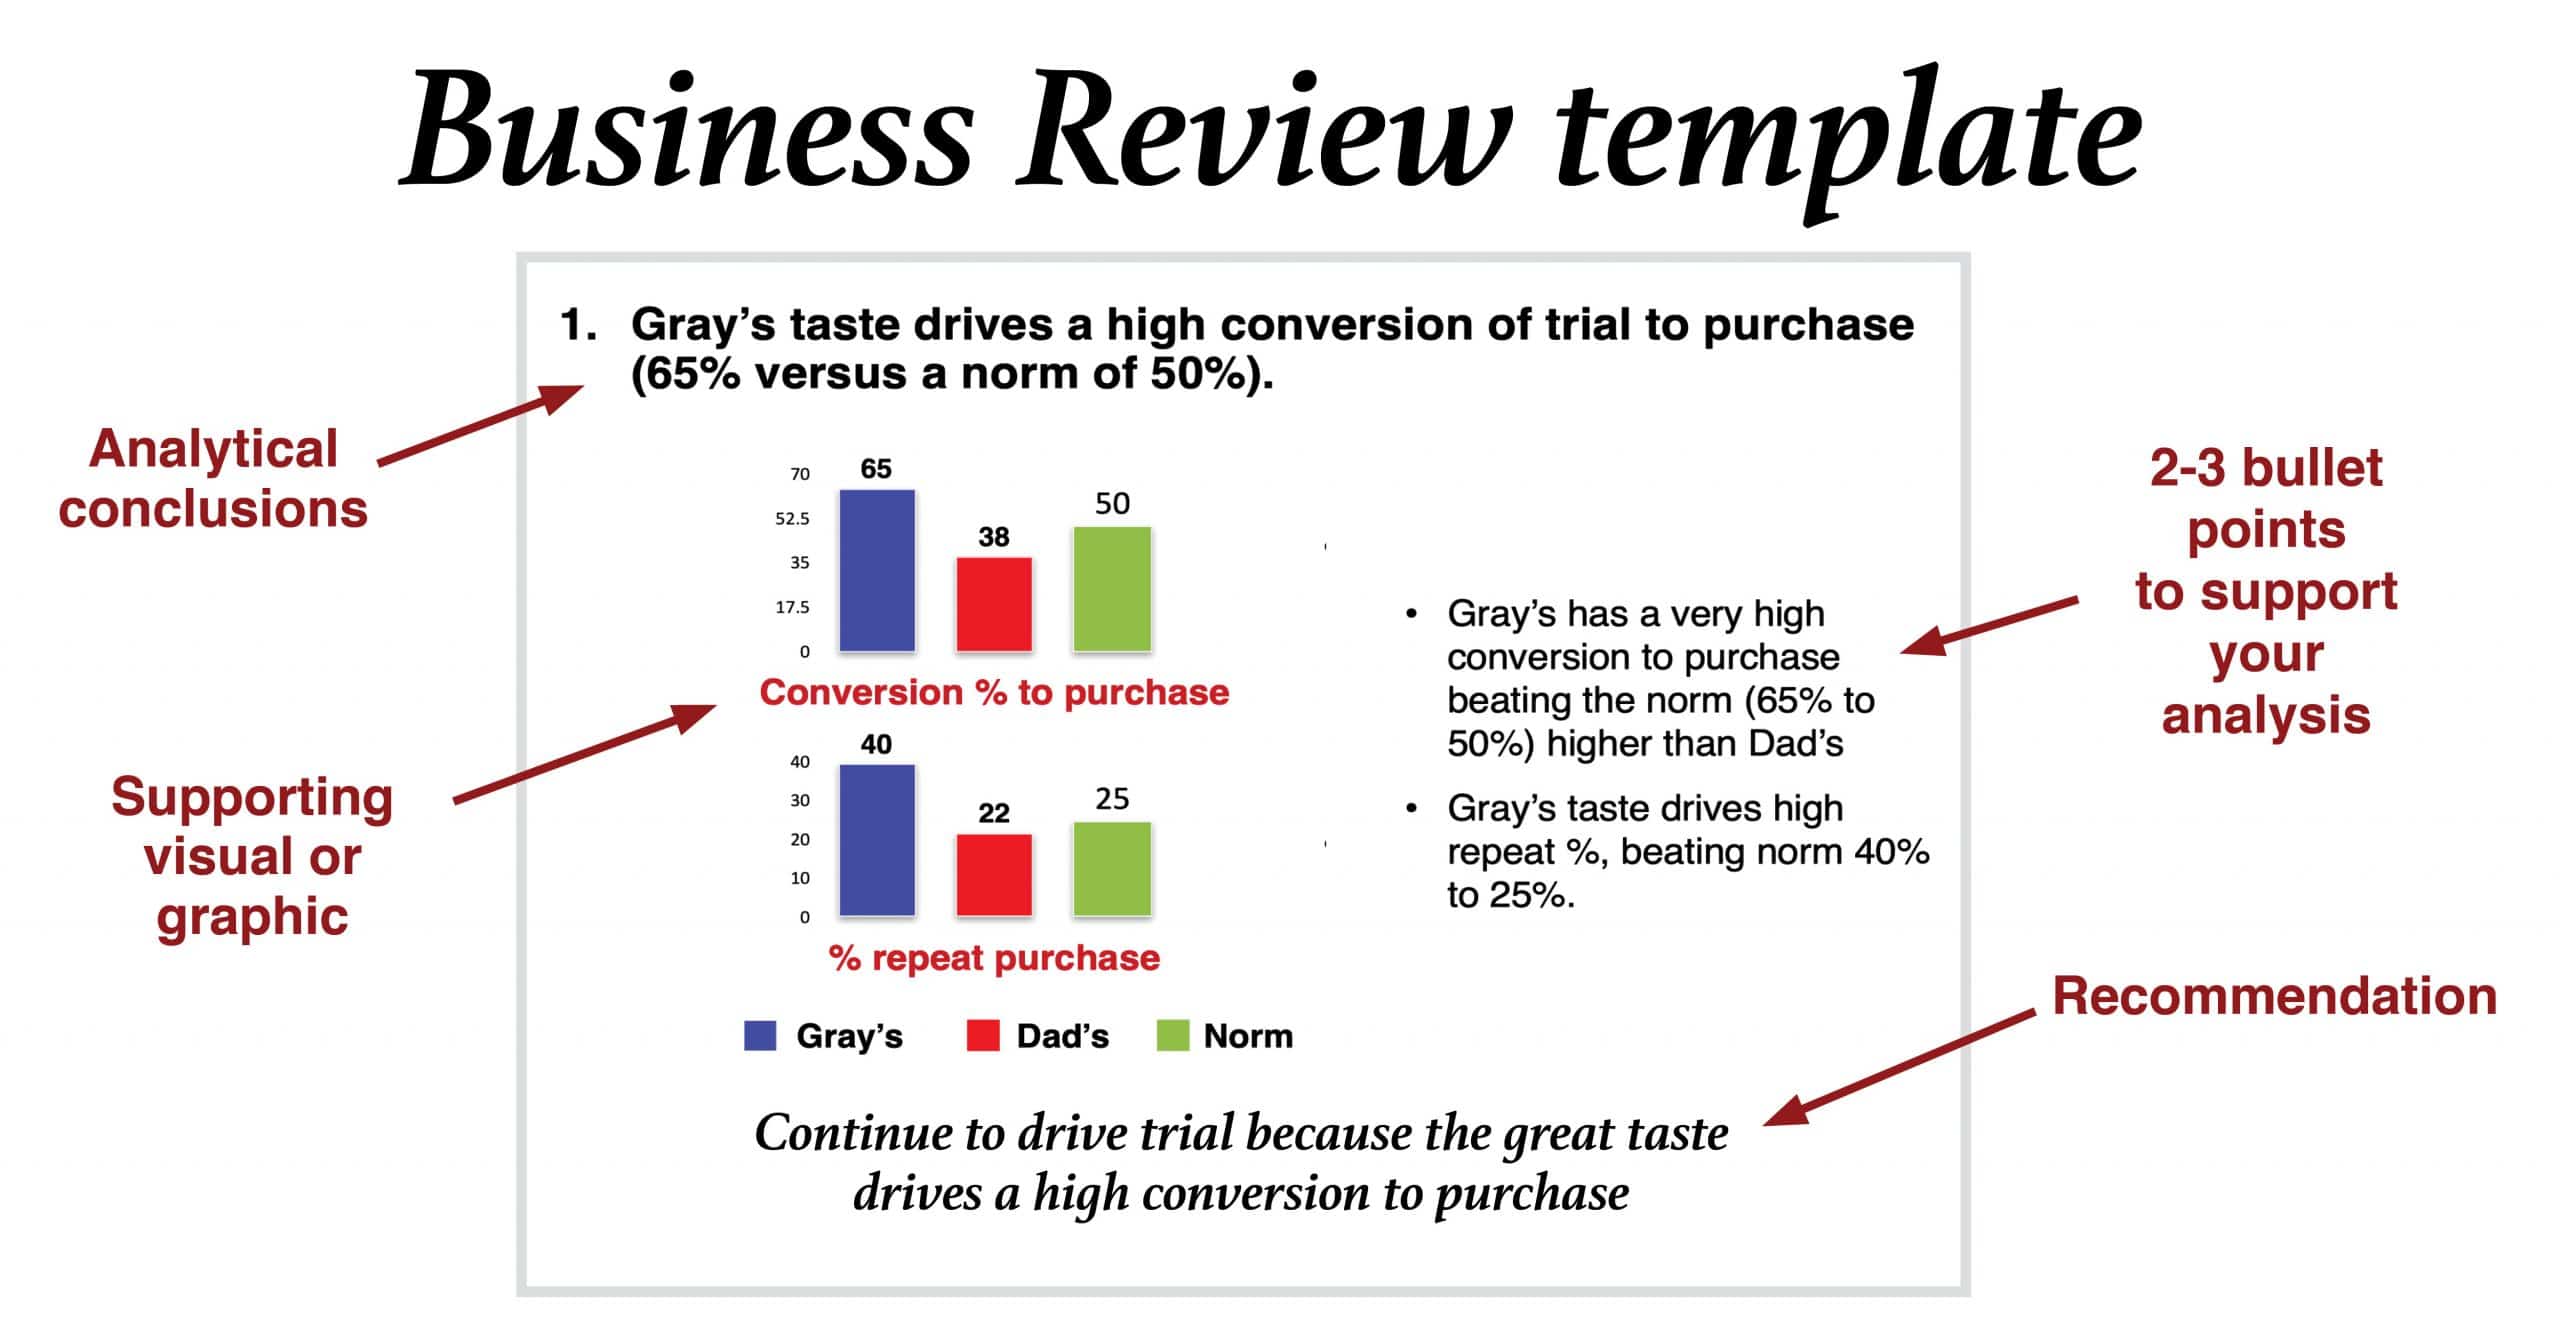 Business Review template (PowerPoint) beloved brands